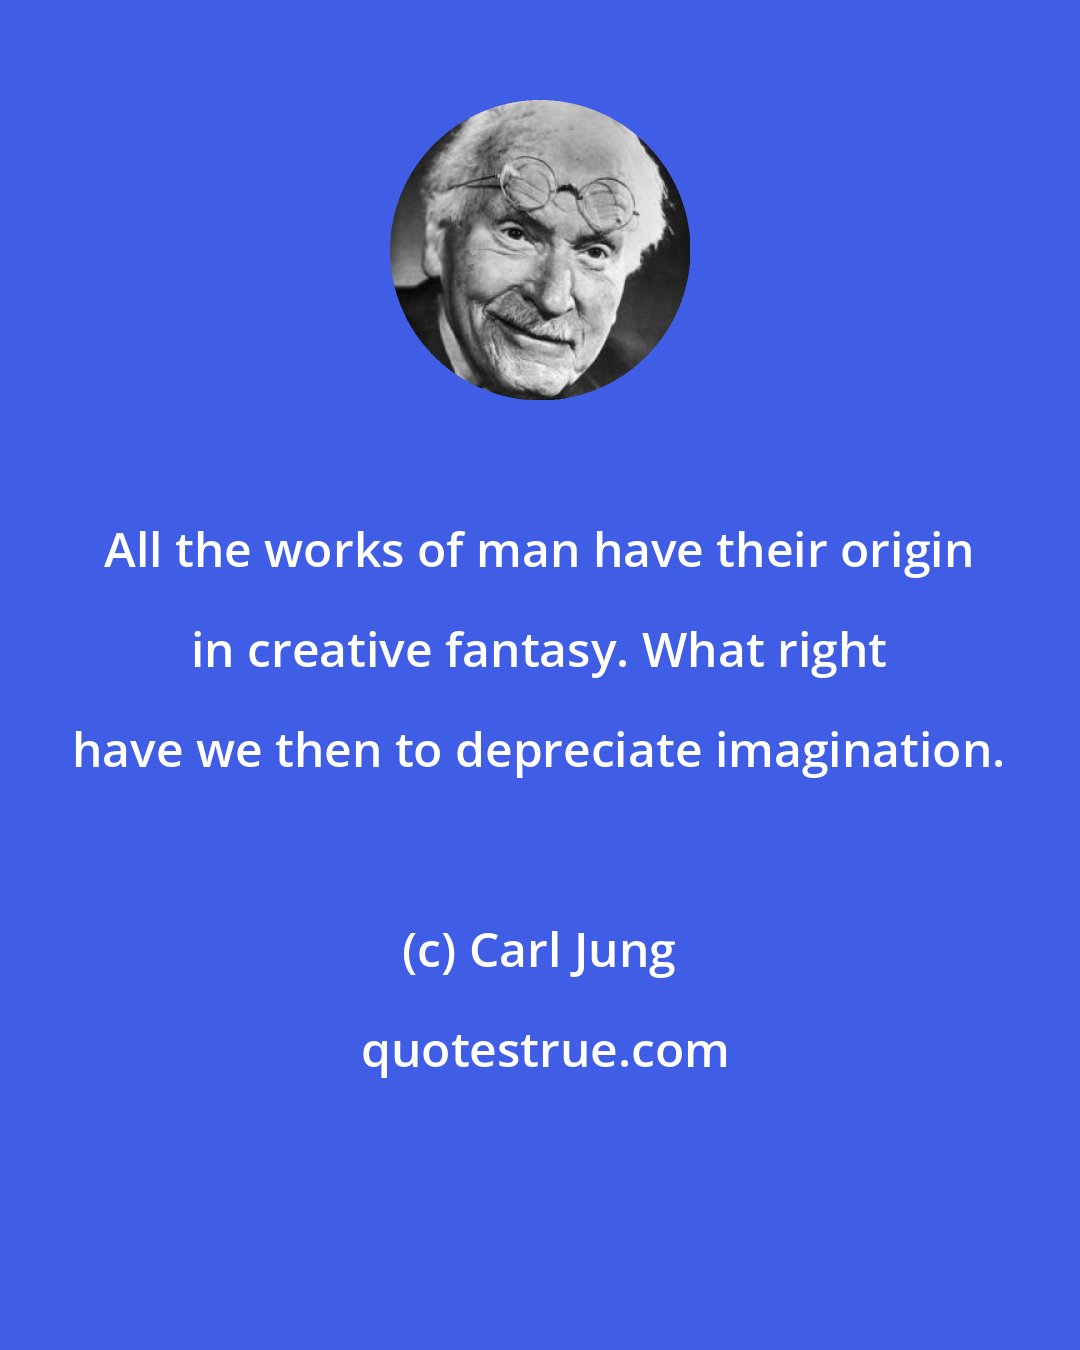 Carl Jung: All the works of man have their origin in creative fantasy. What right have we then to depreciate imagination.